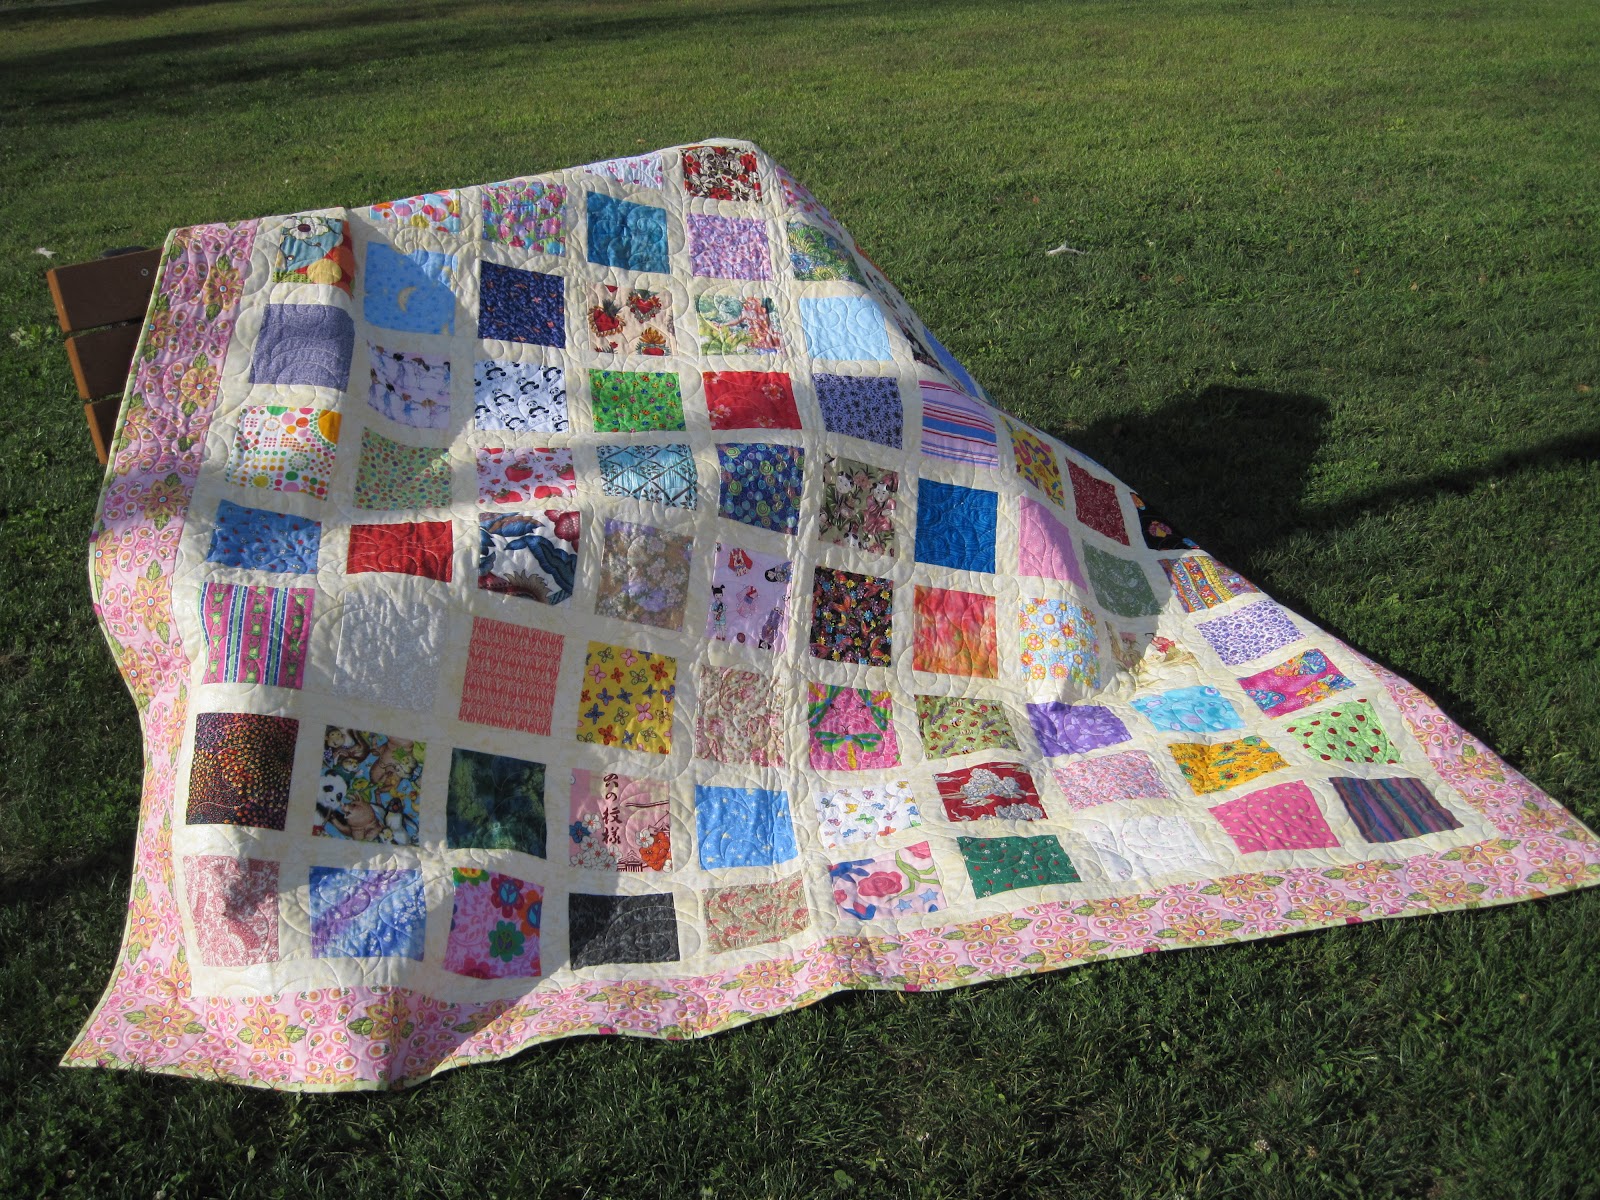 Crayon Box Quilt Studio: One Hundred Good Wishes Quilt for Miss M - a ...